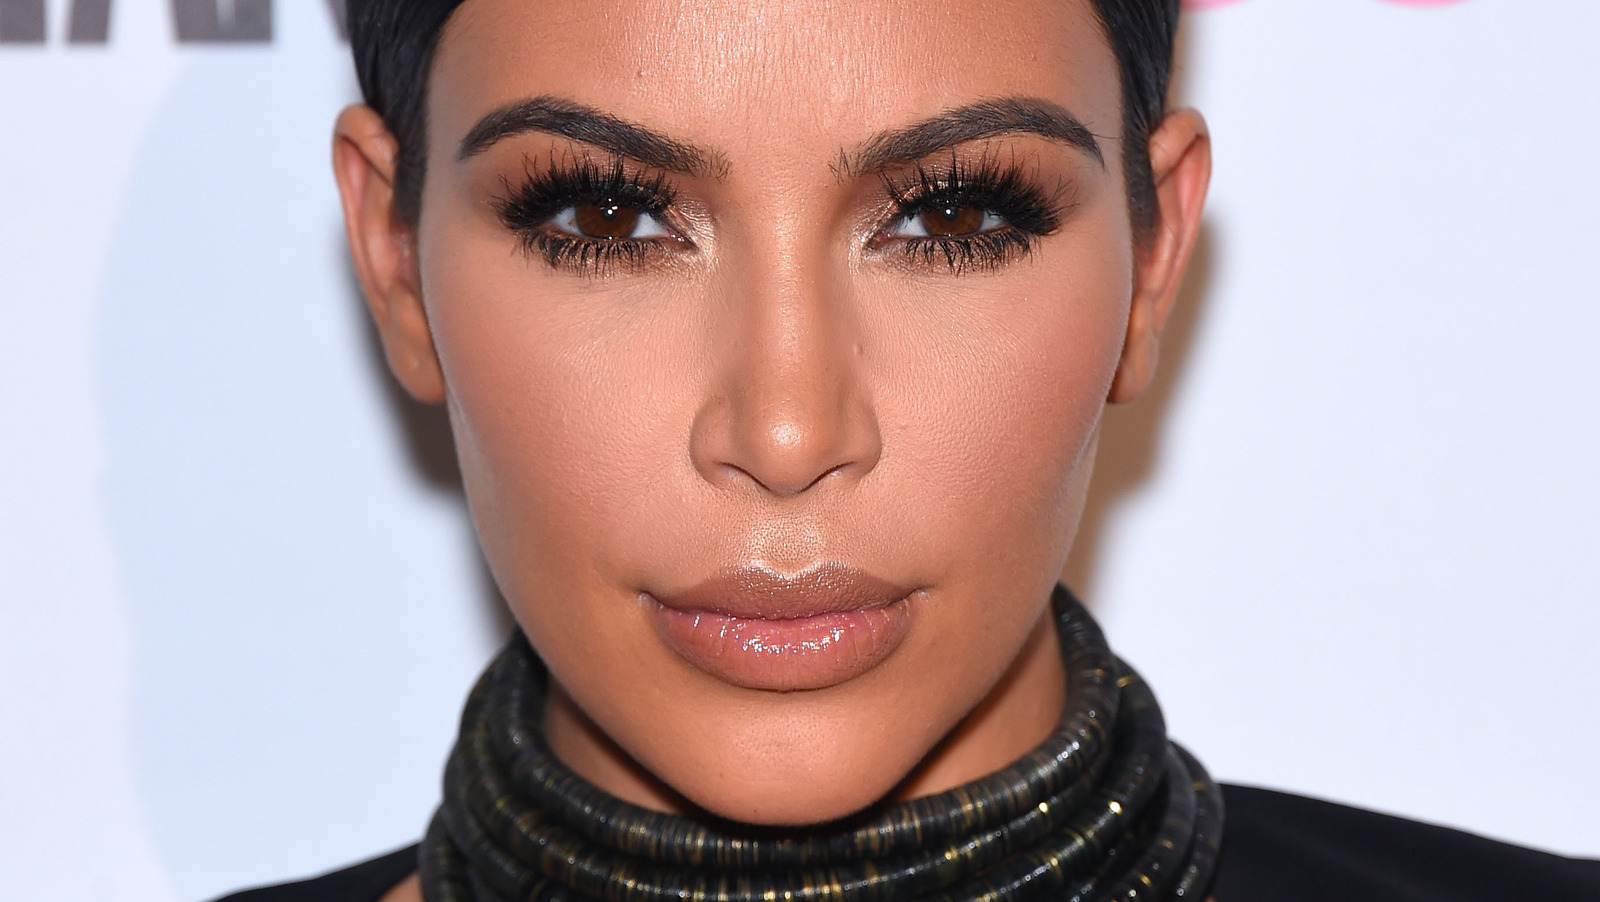 Kim Kardashian’s claims about her bone density have social media dragging her right and left